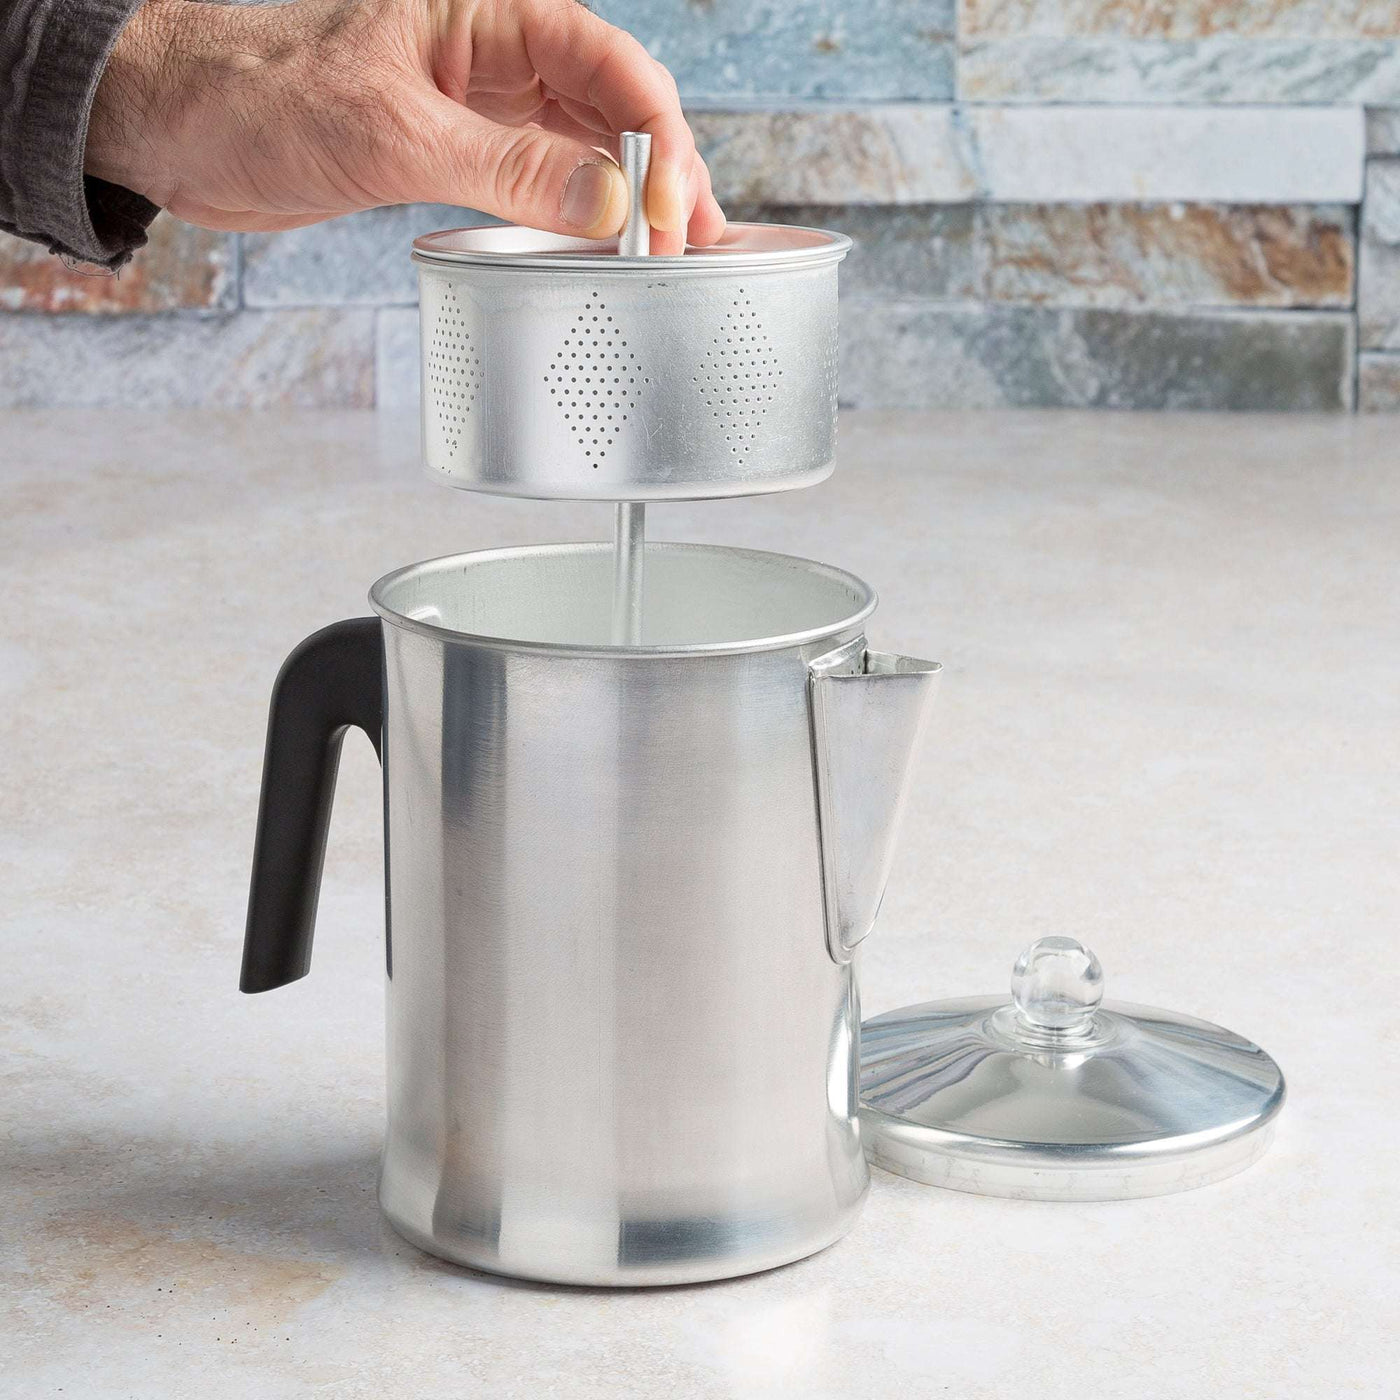 How to Clean a Stovetop Percolator